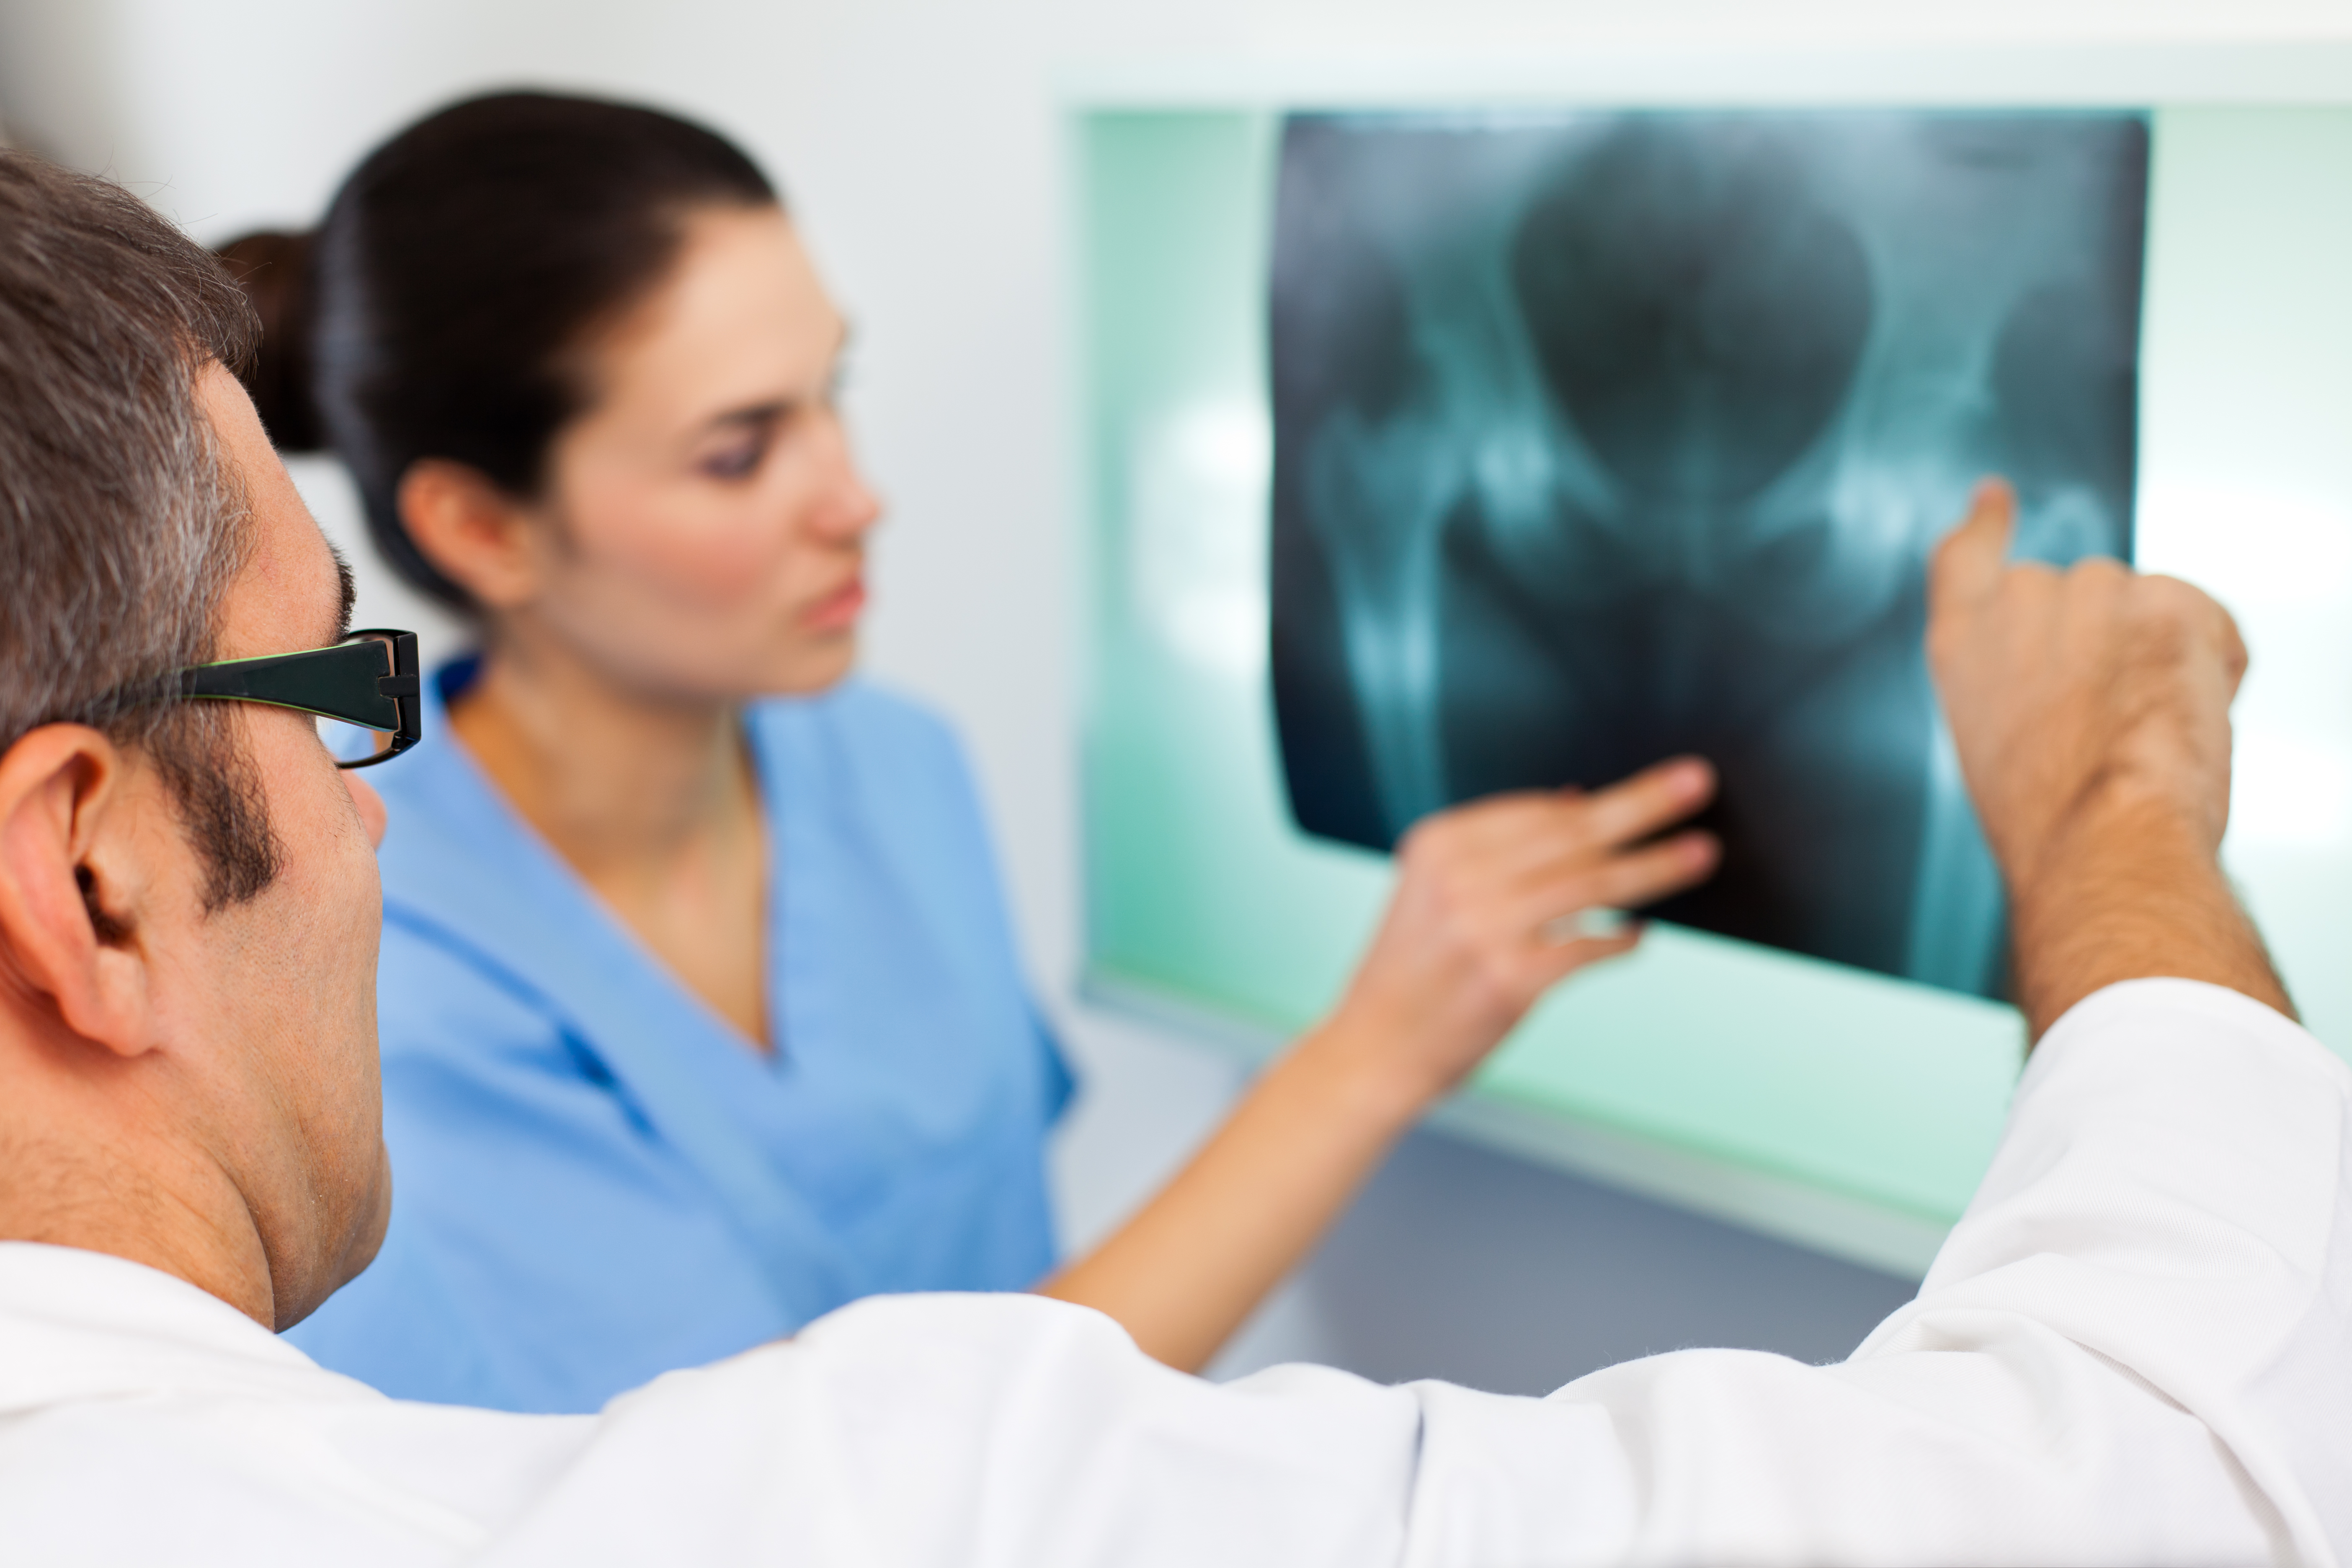 Complex Fracture Of The Pelvis: Do You Need An Orthopedic Surgeon